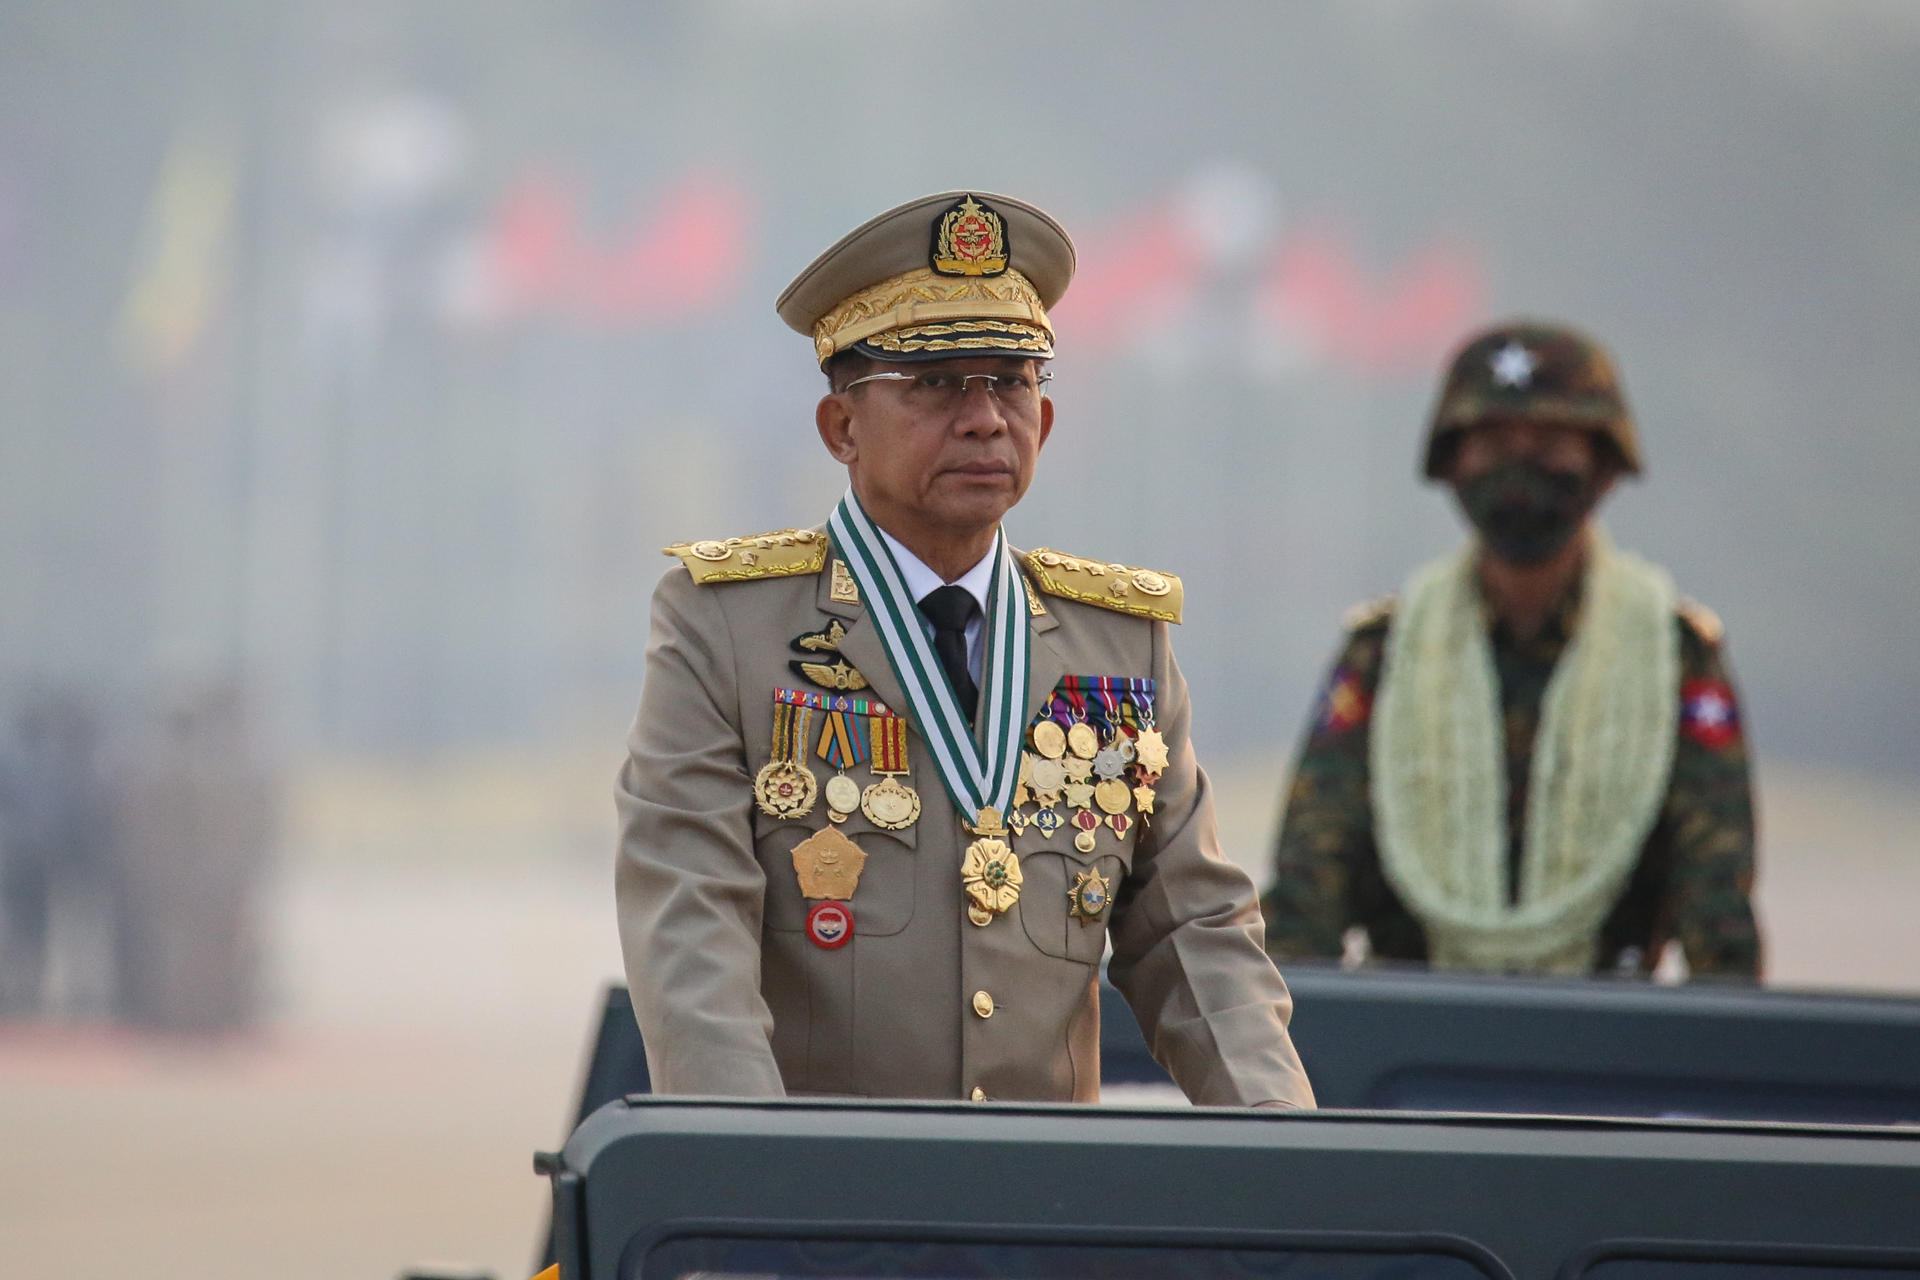 Myanmar military Commander-in-Chief Senior General Min Aung Hlaing (L) participates in a parade during the 76th Armed Forces Day in Naypyitaw, Myanmar, 27 March 2021. EPA-EFE FILE/STRINGER
